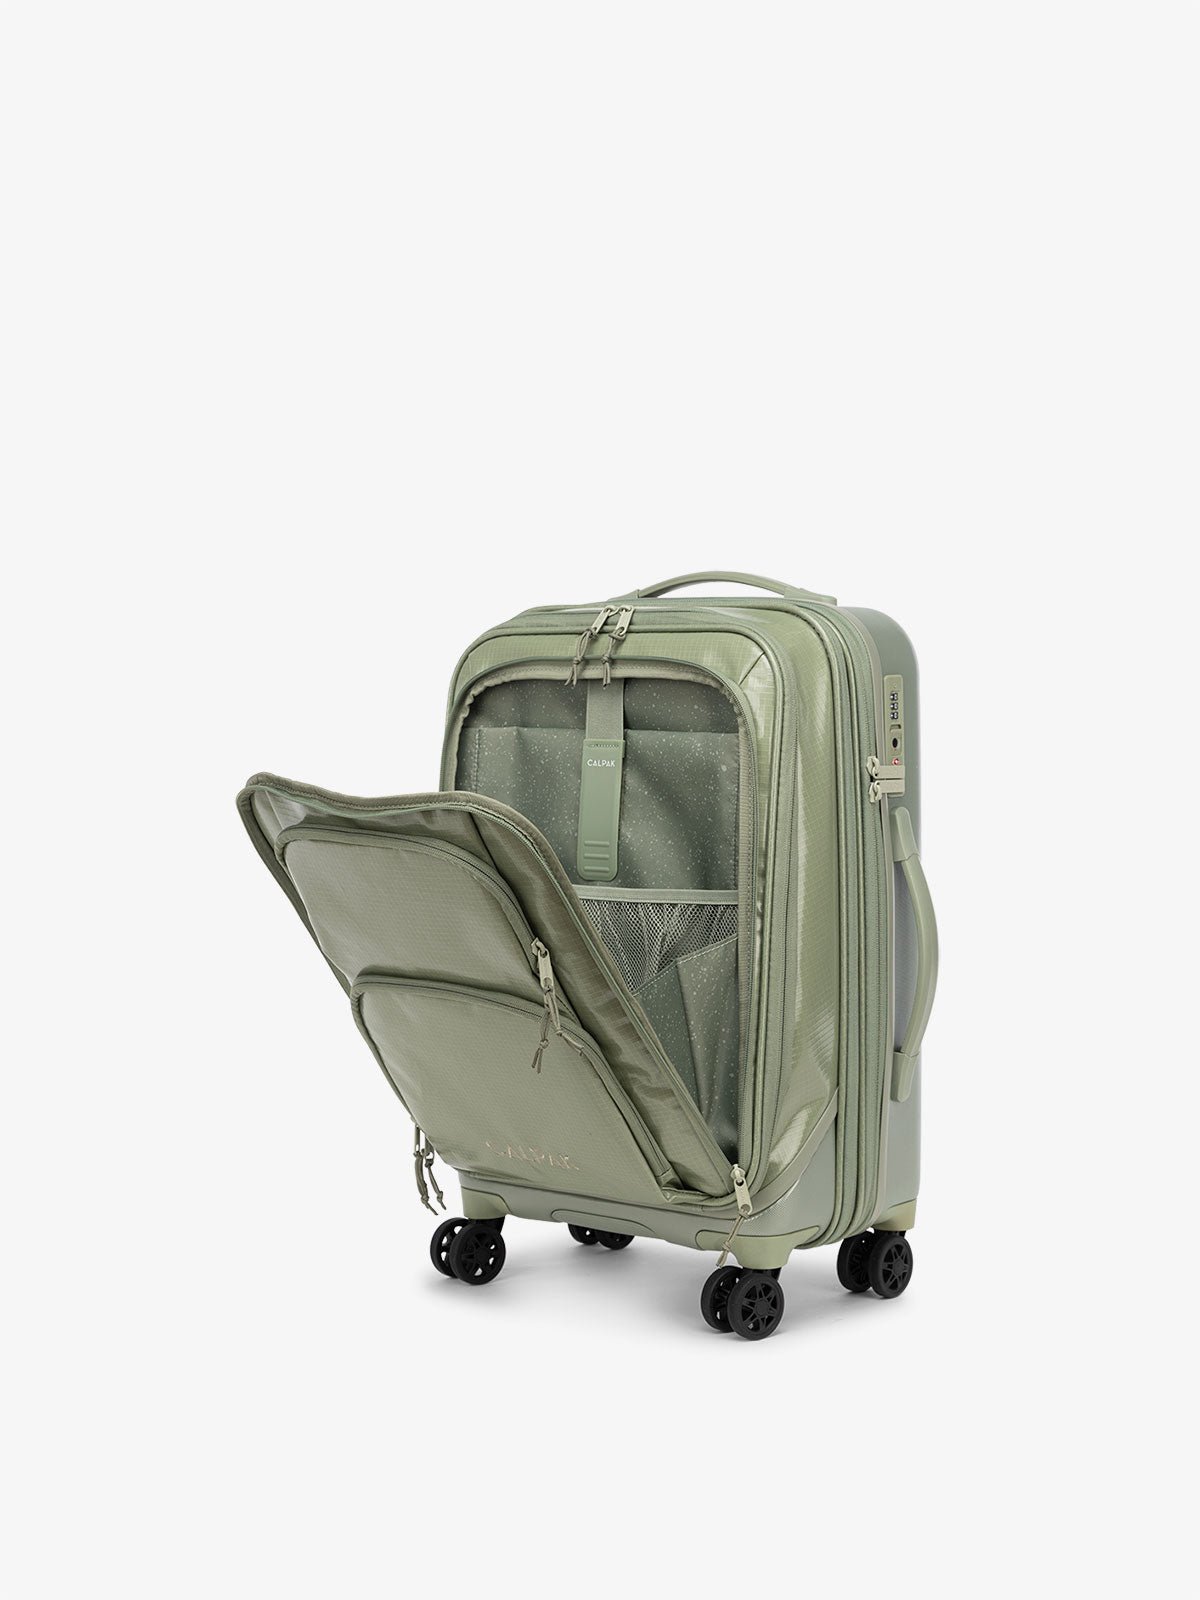 CALPAK Terra Carry-On expandable Luggage with padded laptop compartment in juniper